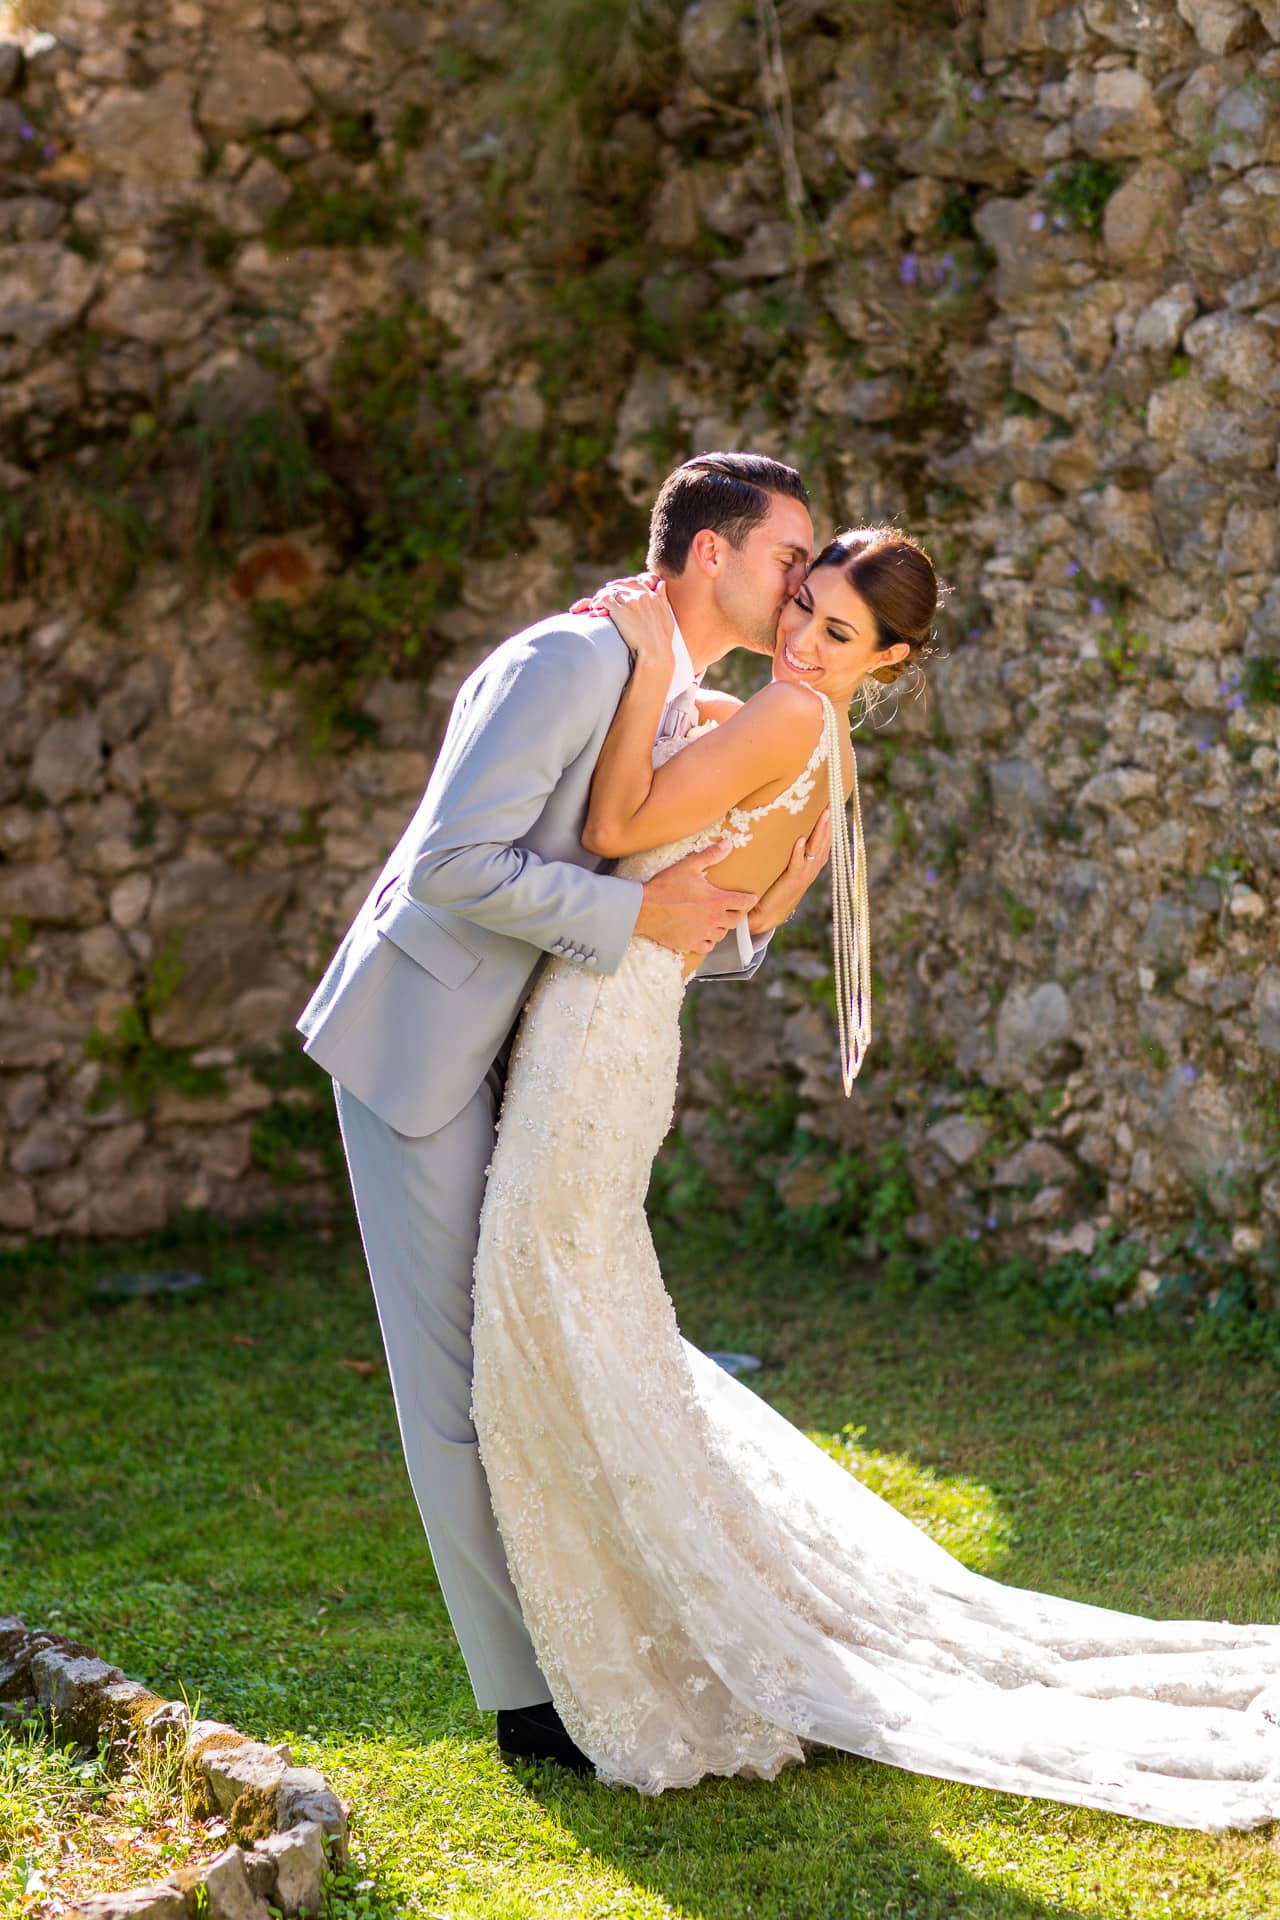 stunning wedding couple by a rustic stone wall